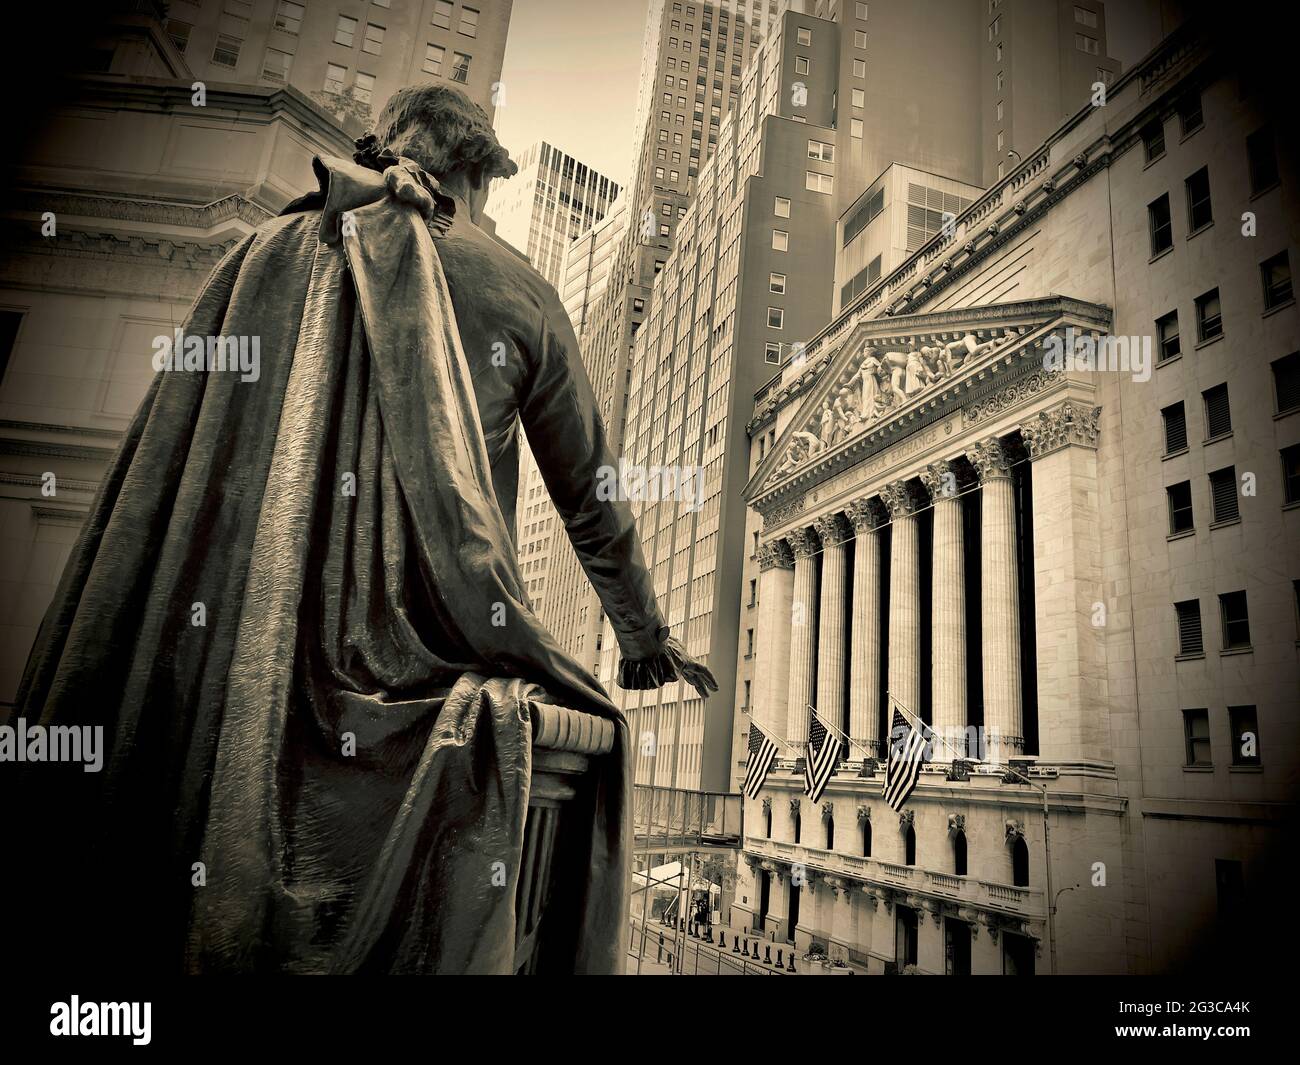 Statue of George Washington at Federal Hall & New York Stock Exchange building facade in the background. Stock Photo